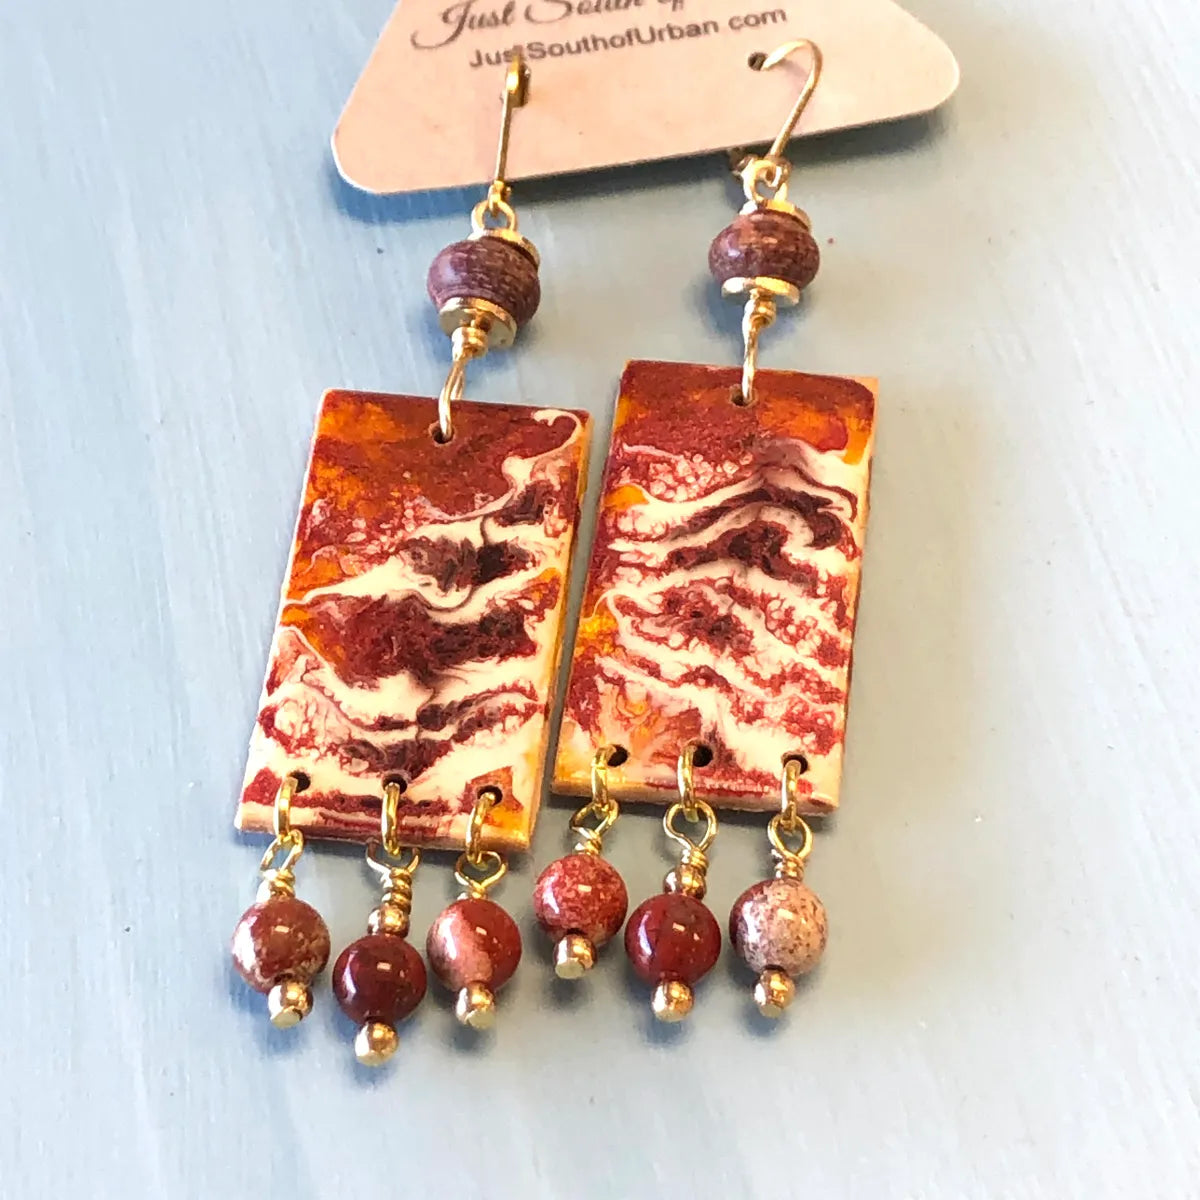 Rustic Rust and Gemstone Earrings, Hand Painted, 3.25 Inches in Length, Lightweight Boho Earrings